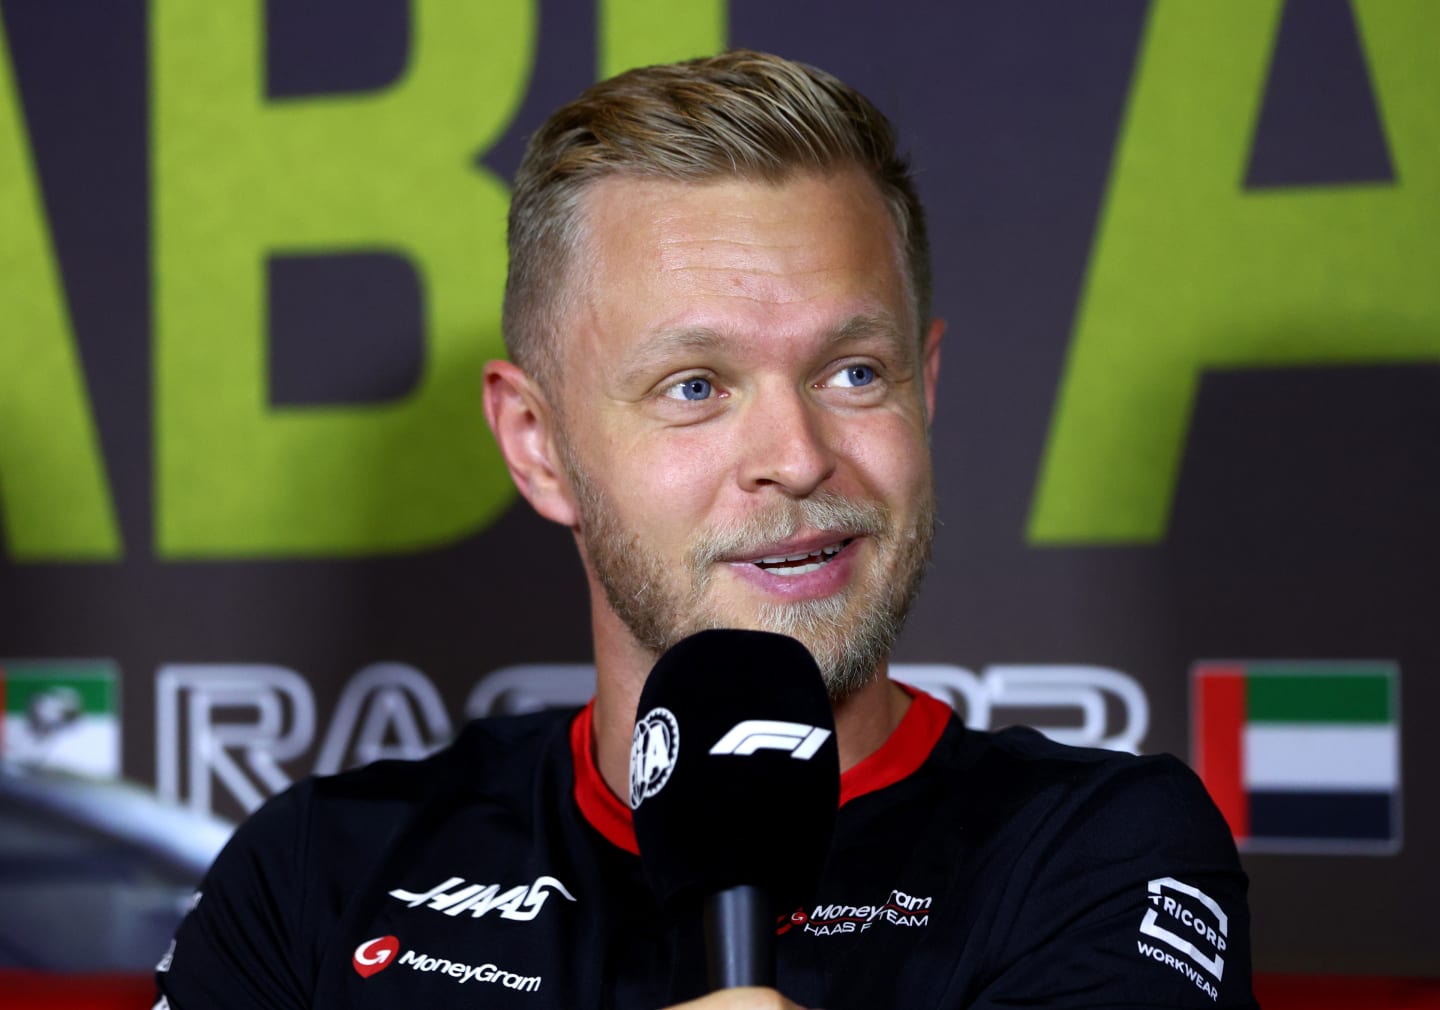 ABU DHABI, UNITED ARAB EMIRATES - NOVEMBER 23: Kevin Magnussen of Denmark and Haas F1 attends the Drivers Press Conference during previews ahead of the F1 Grand Prix of Abu Dhabi at Yas Marina Circuit on November 23, 2023 in Abu Dhabi, United Arab Emirates. (Photo by Clive Rose/Getty Images)